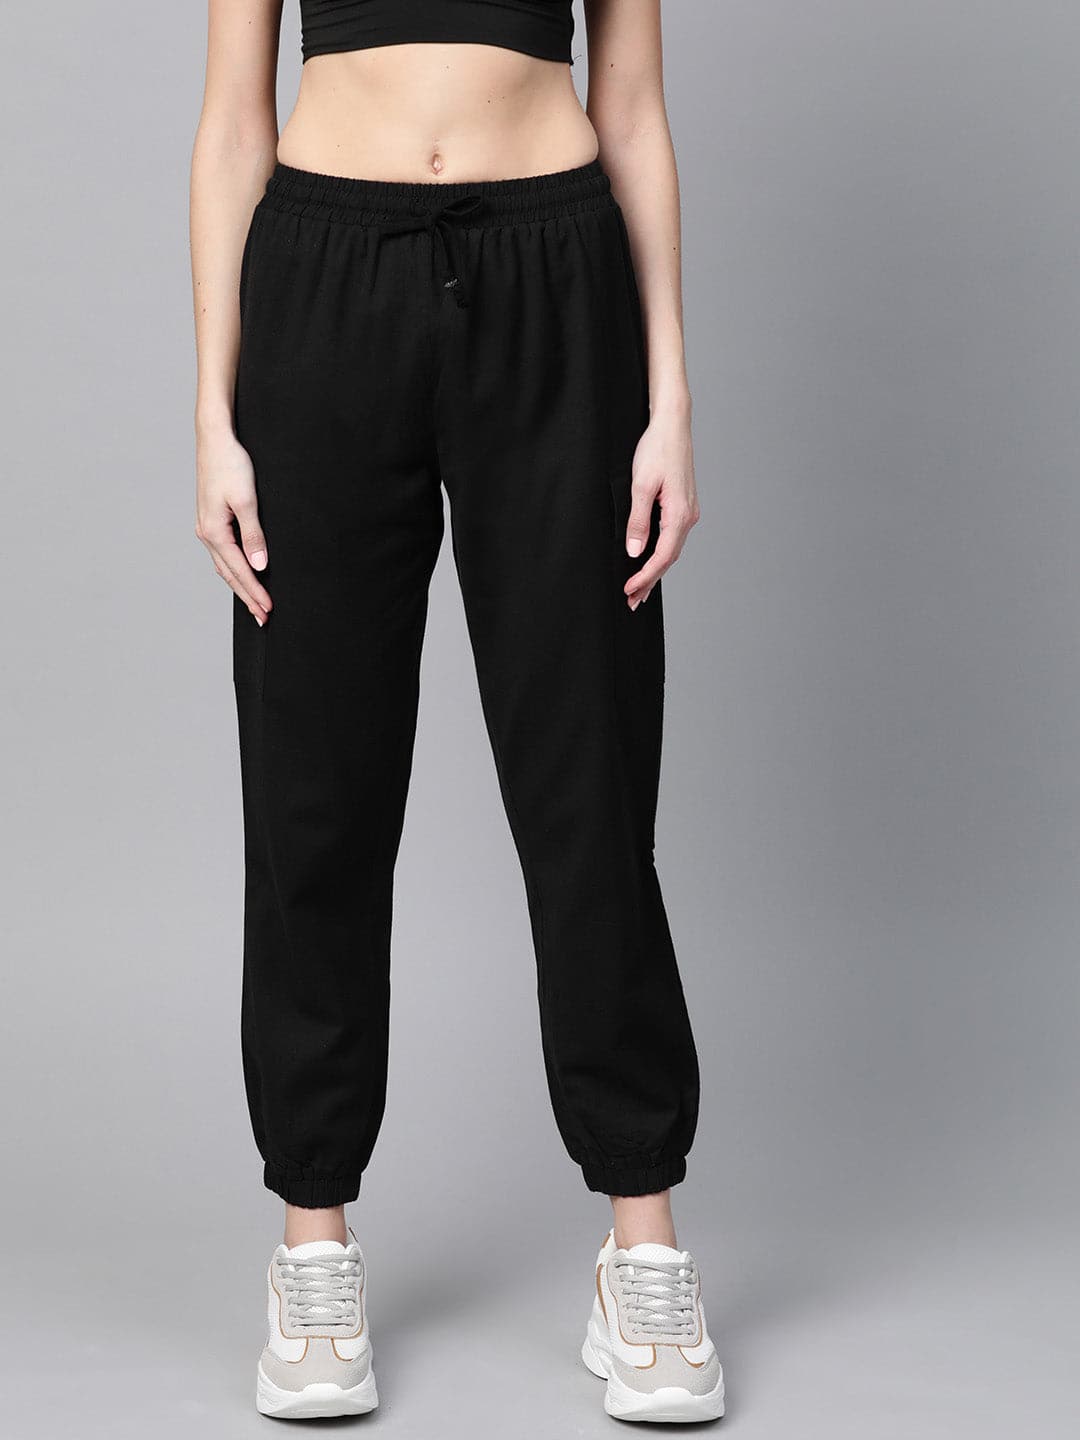 Sweatpants Jogging Pants With Pockets For Women